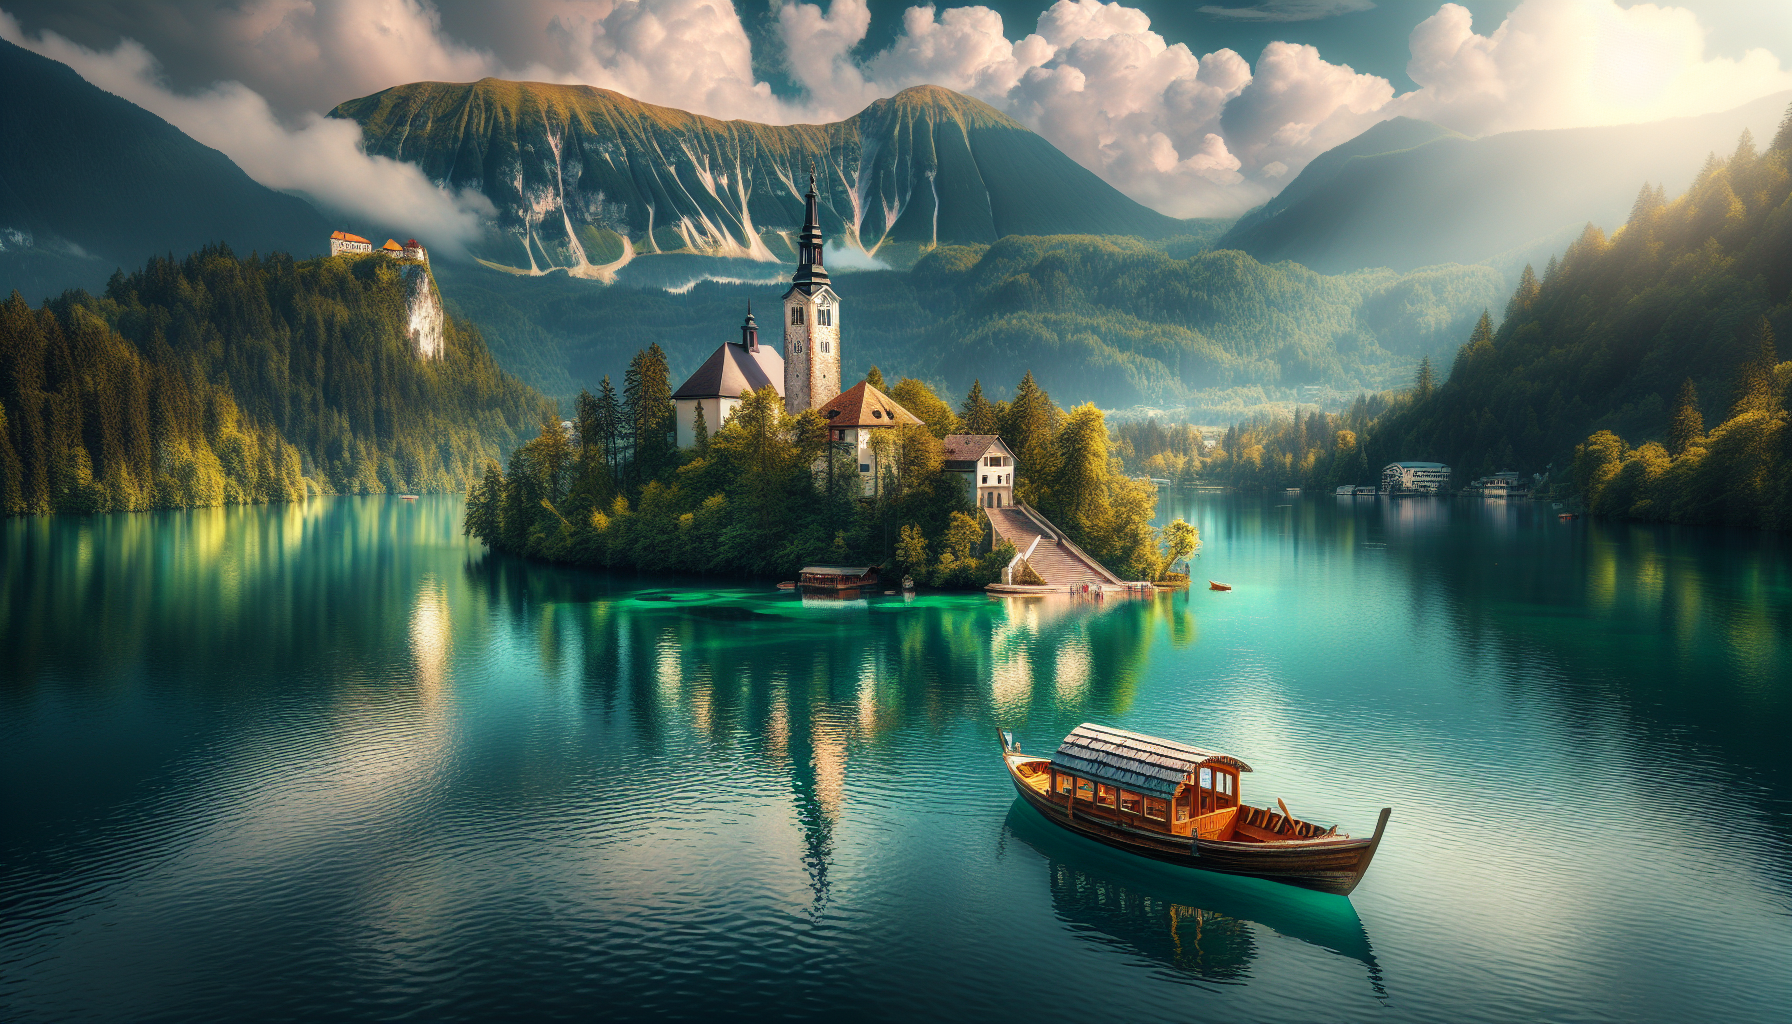 explore the best places to visit in europe and discover the breathtaking beauty of lake bled, slovenia. plan your next adventure in this picturesque destination.